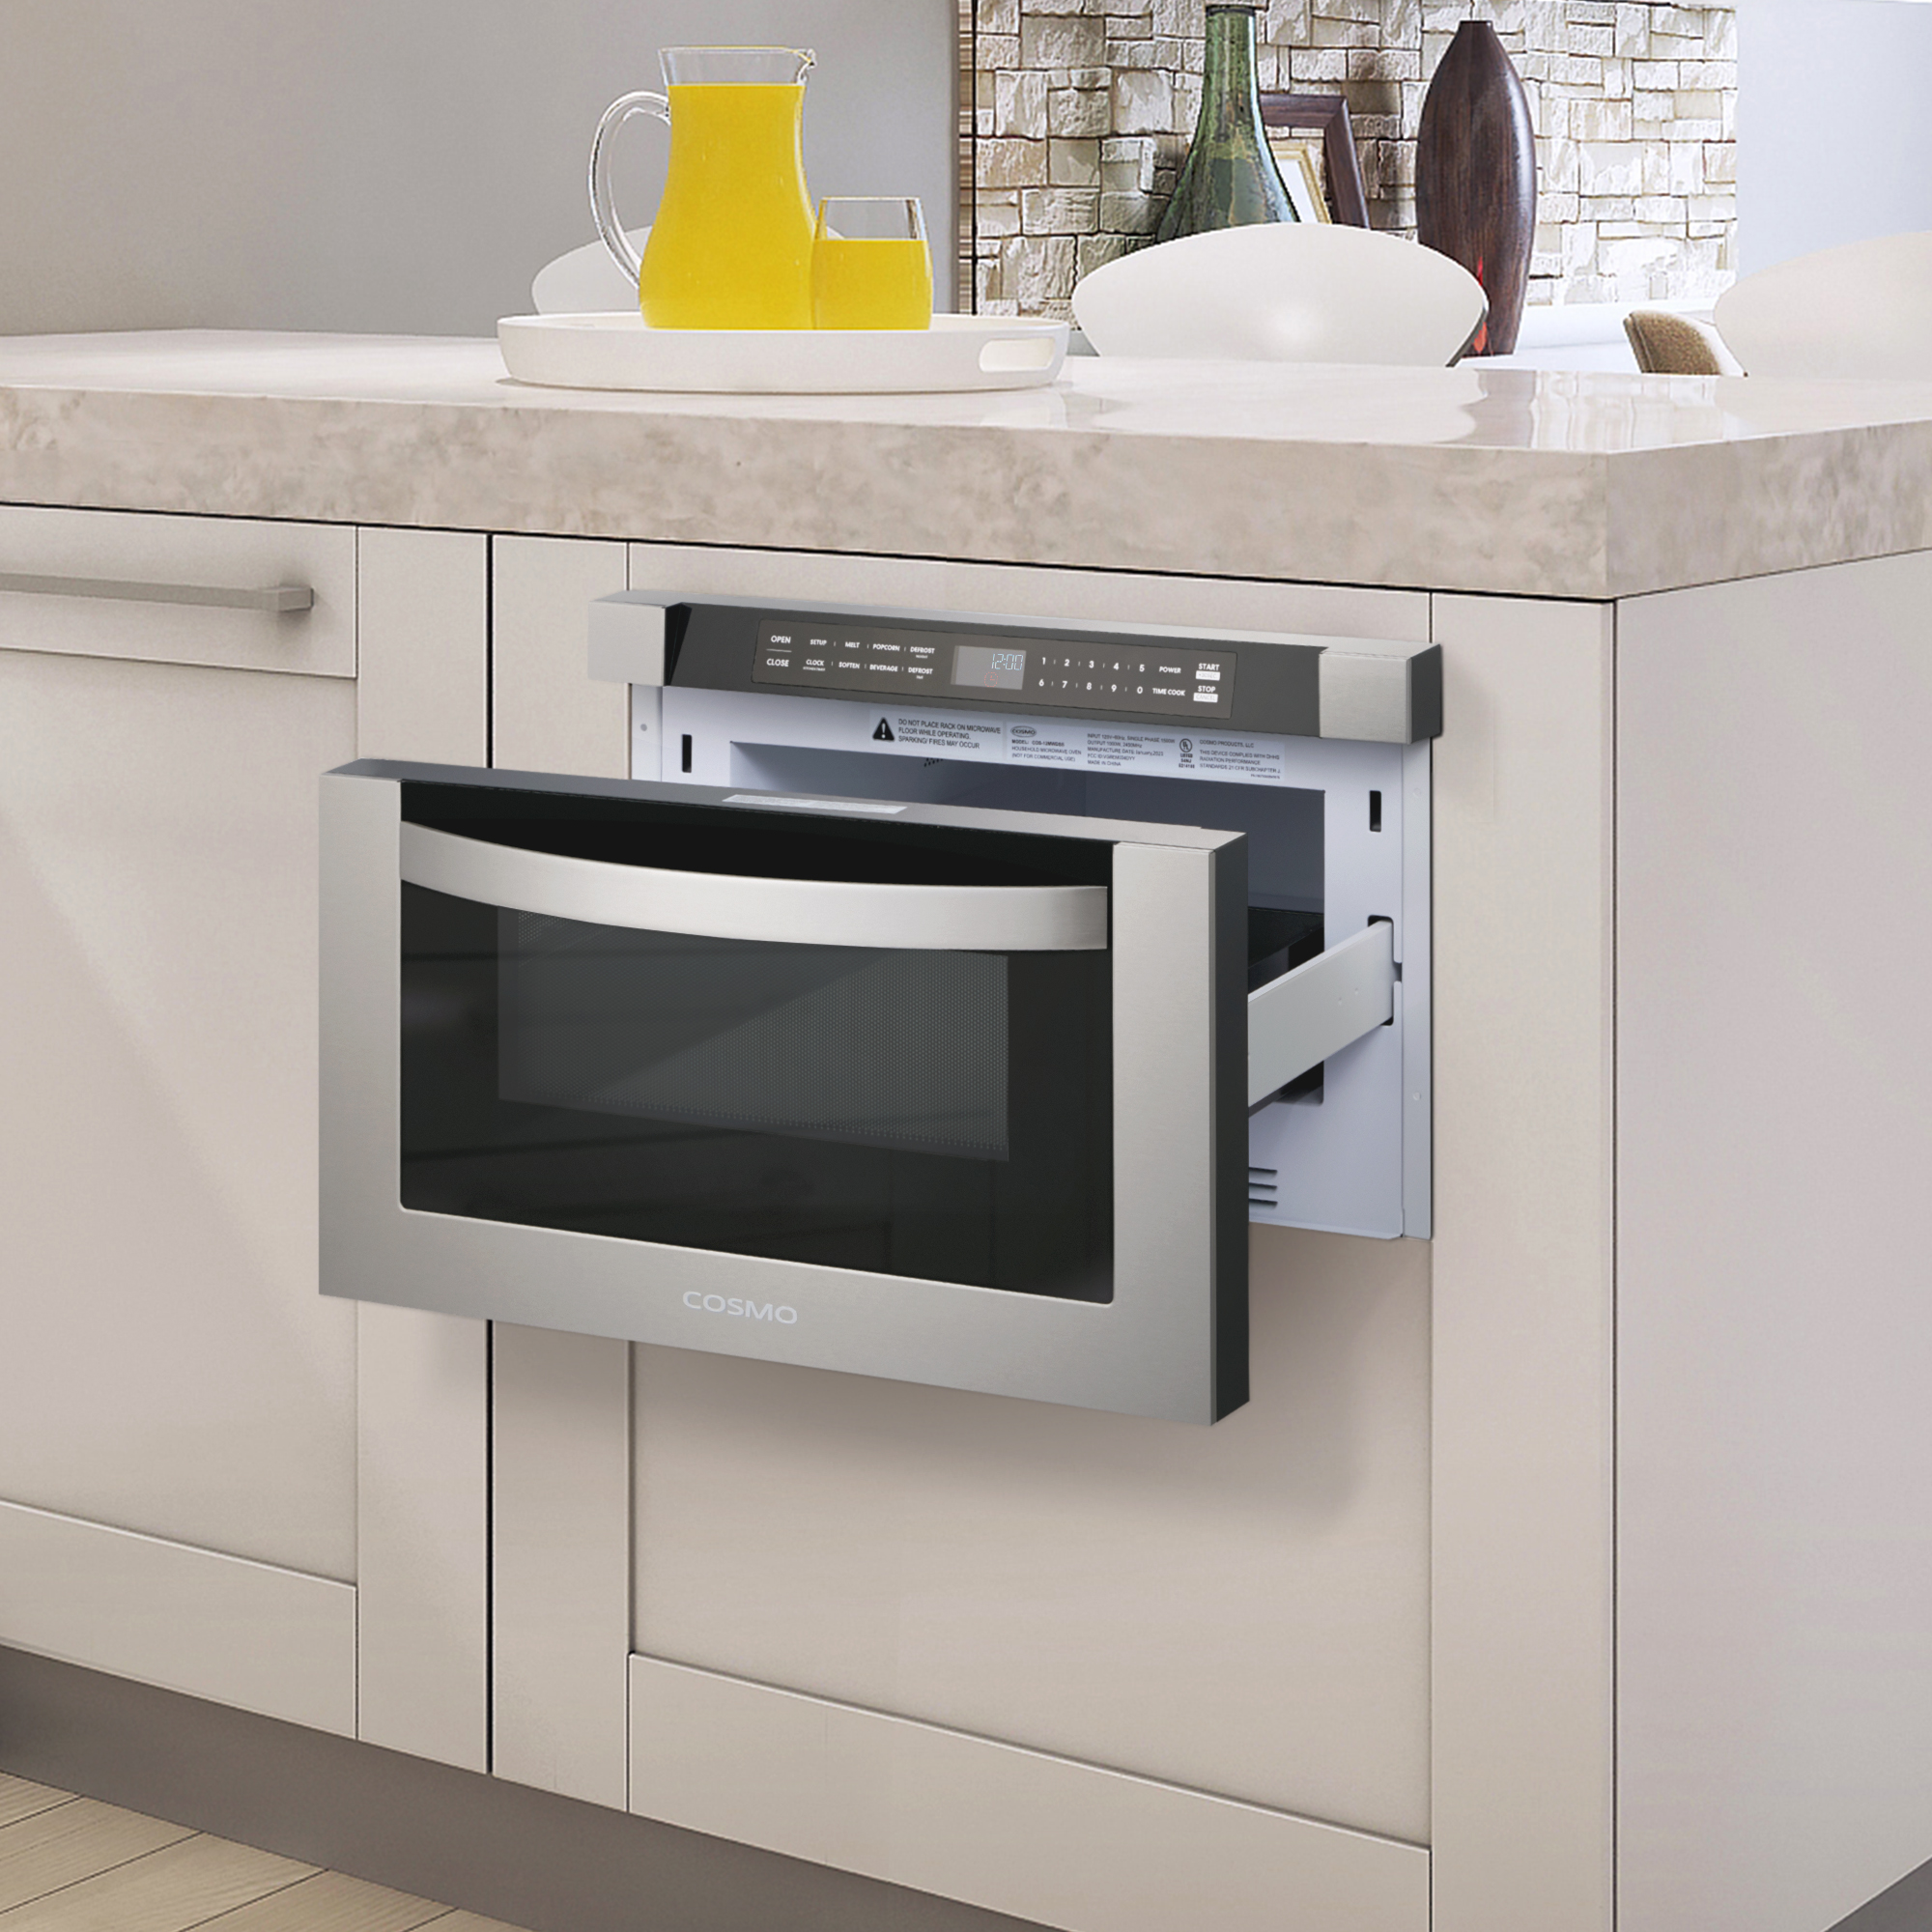 New Product Alert: The Cosmo Microwave Drawer